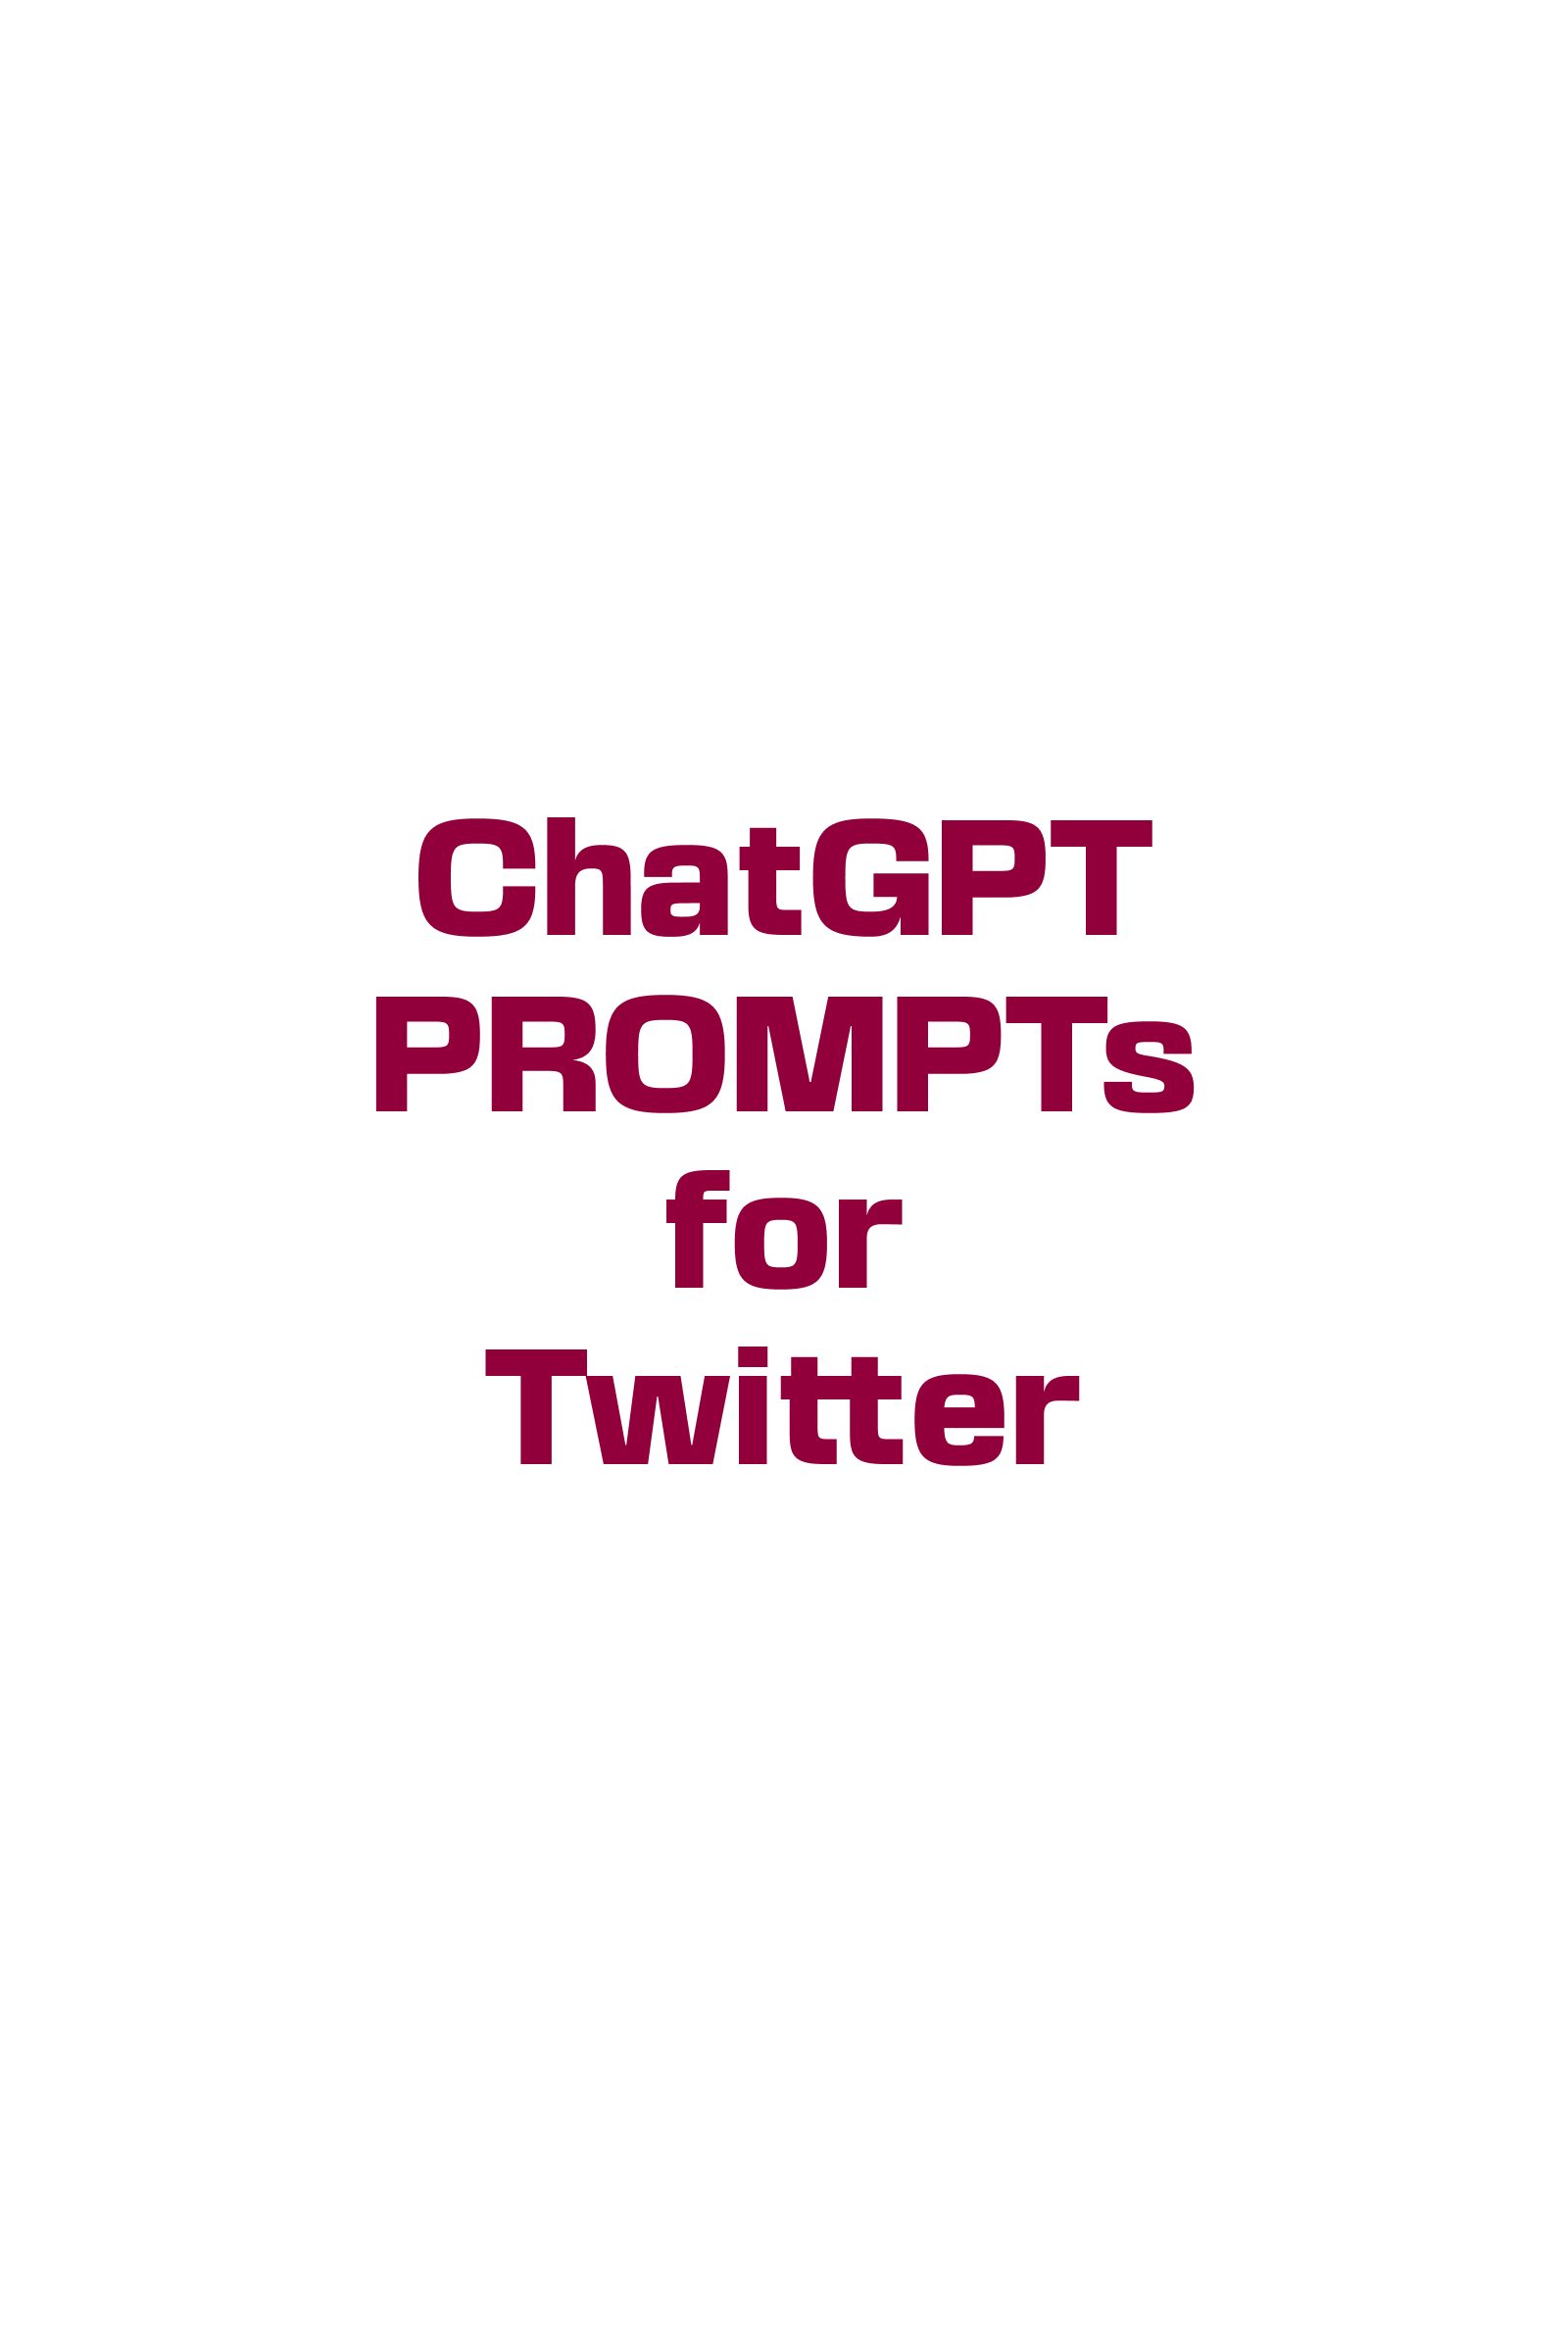 ChatGPT PROMPTs for Twitter